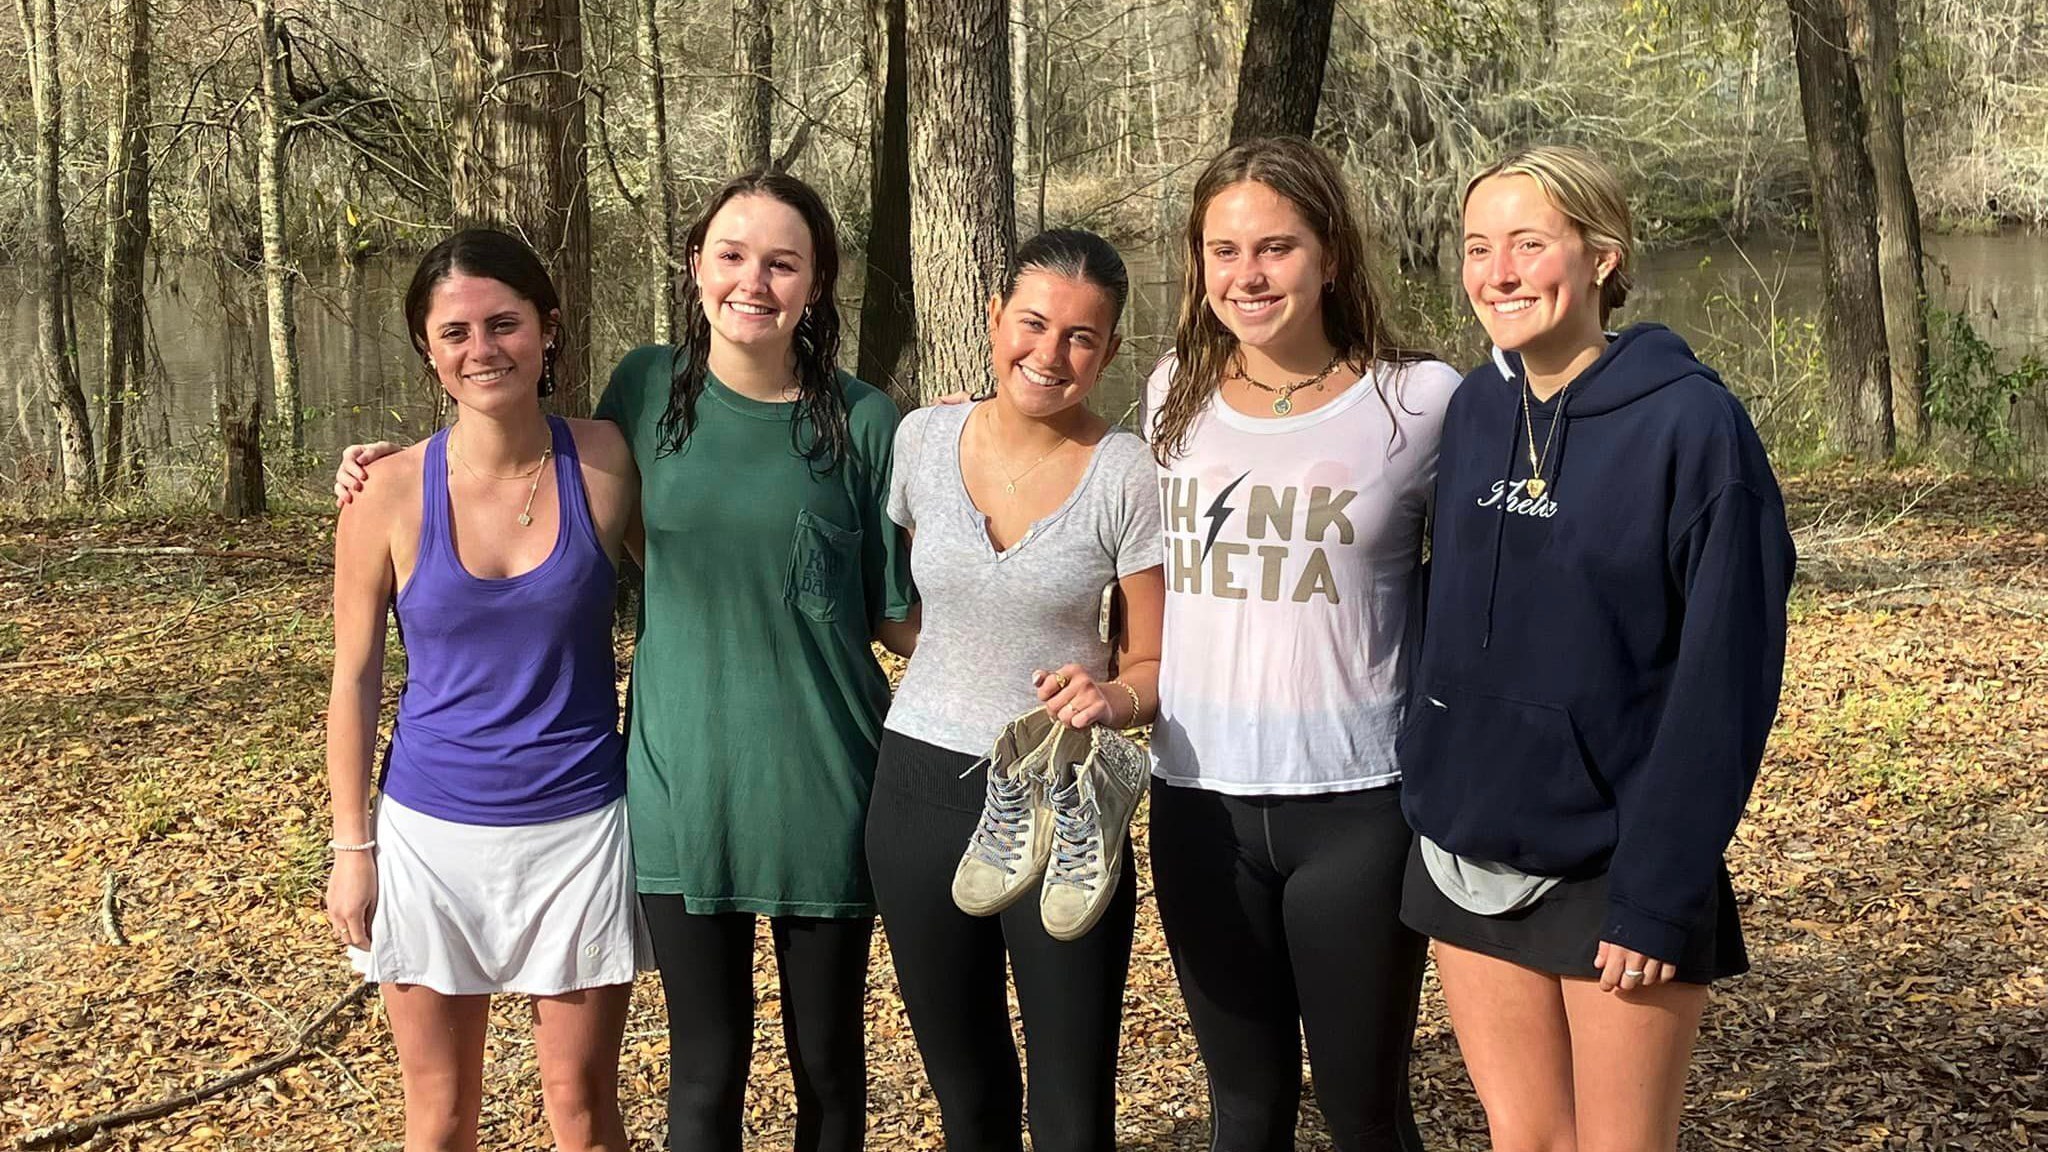 The five students involved in helping the family were headed to Savannah, Georgia, for St. Patrick's Day weekend. (Burke County Sheriff's Office)